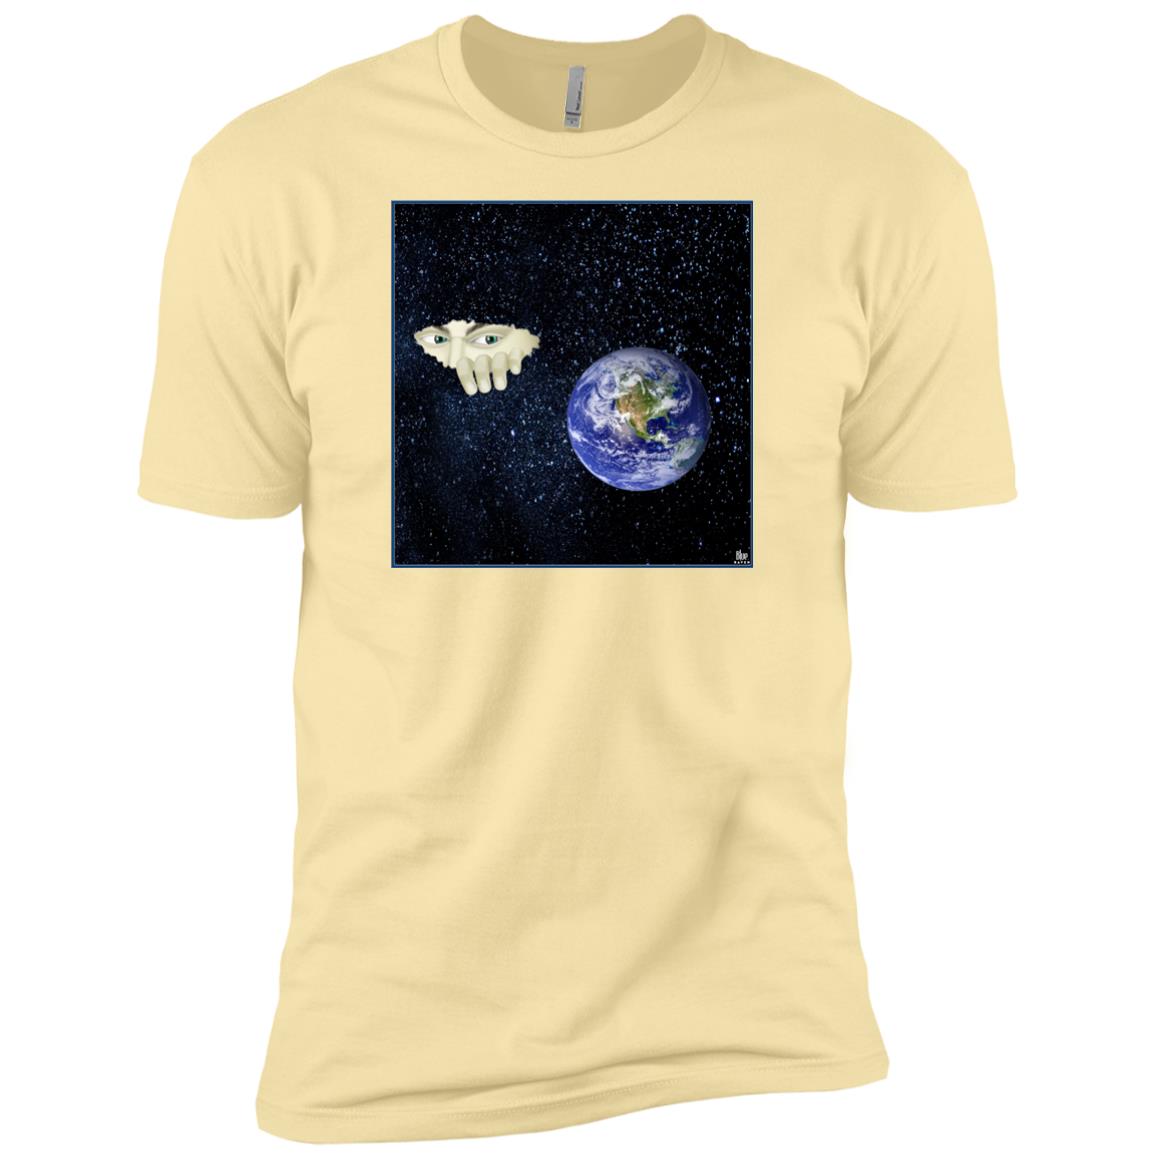 SOMEWHERE OUT THERE - Men's Premium Fitted T-Shirt